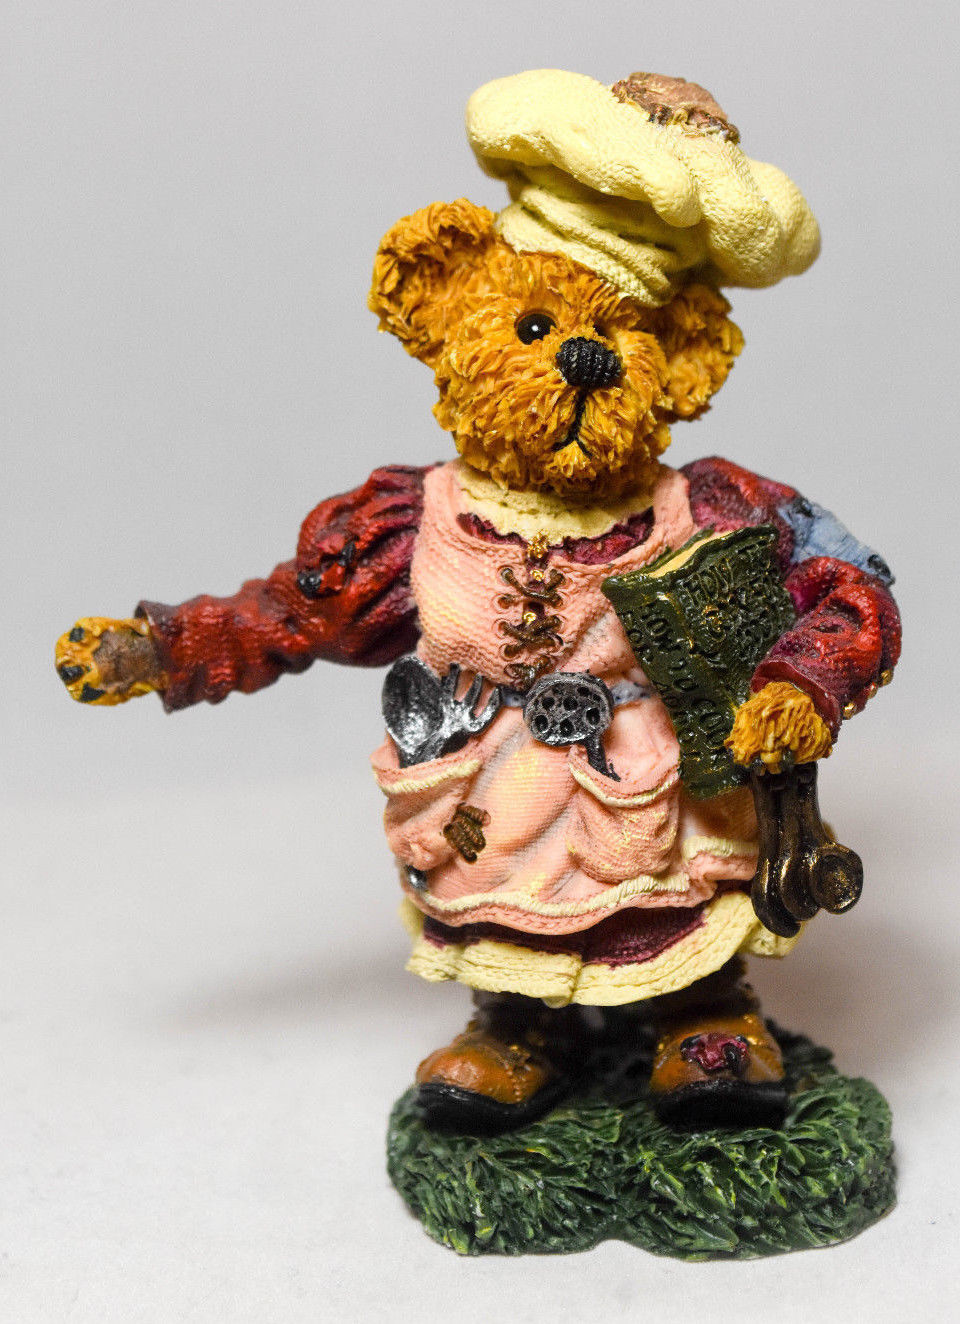 Boyds Bears: Bernice as Mrs Noah - Chief Cook and Bottle - 1st Edition - #2427 - $20.50